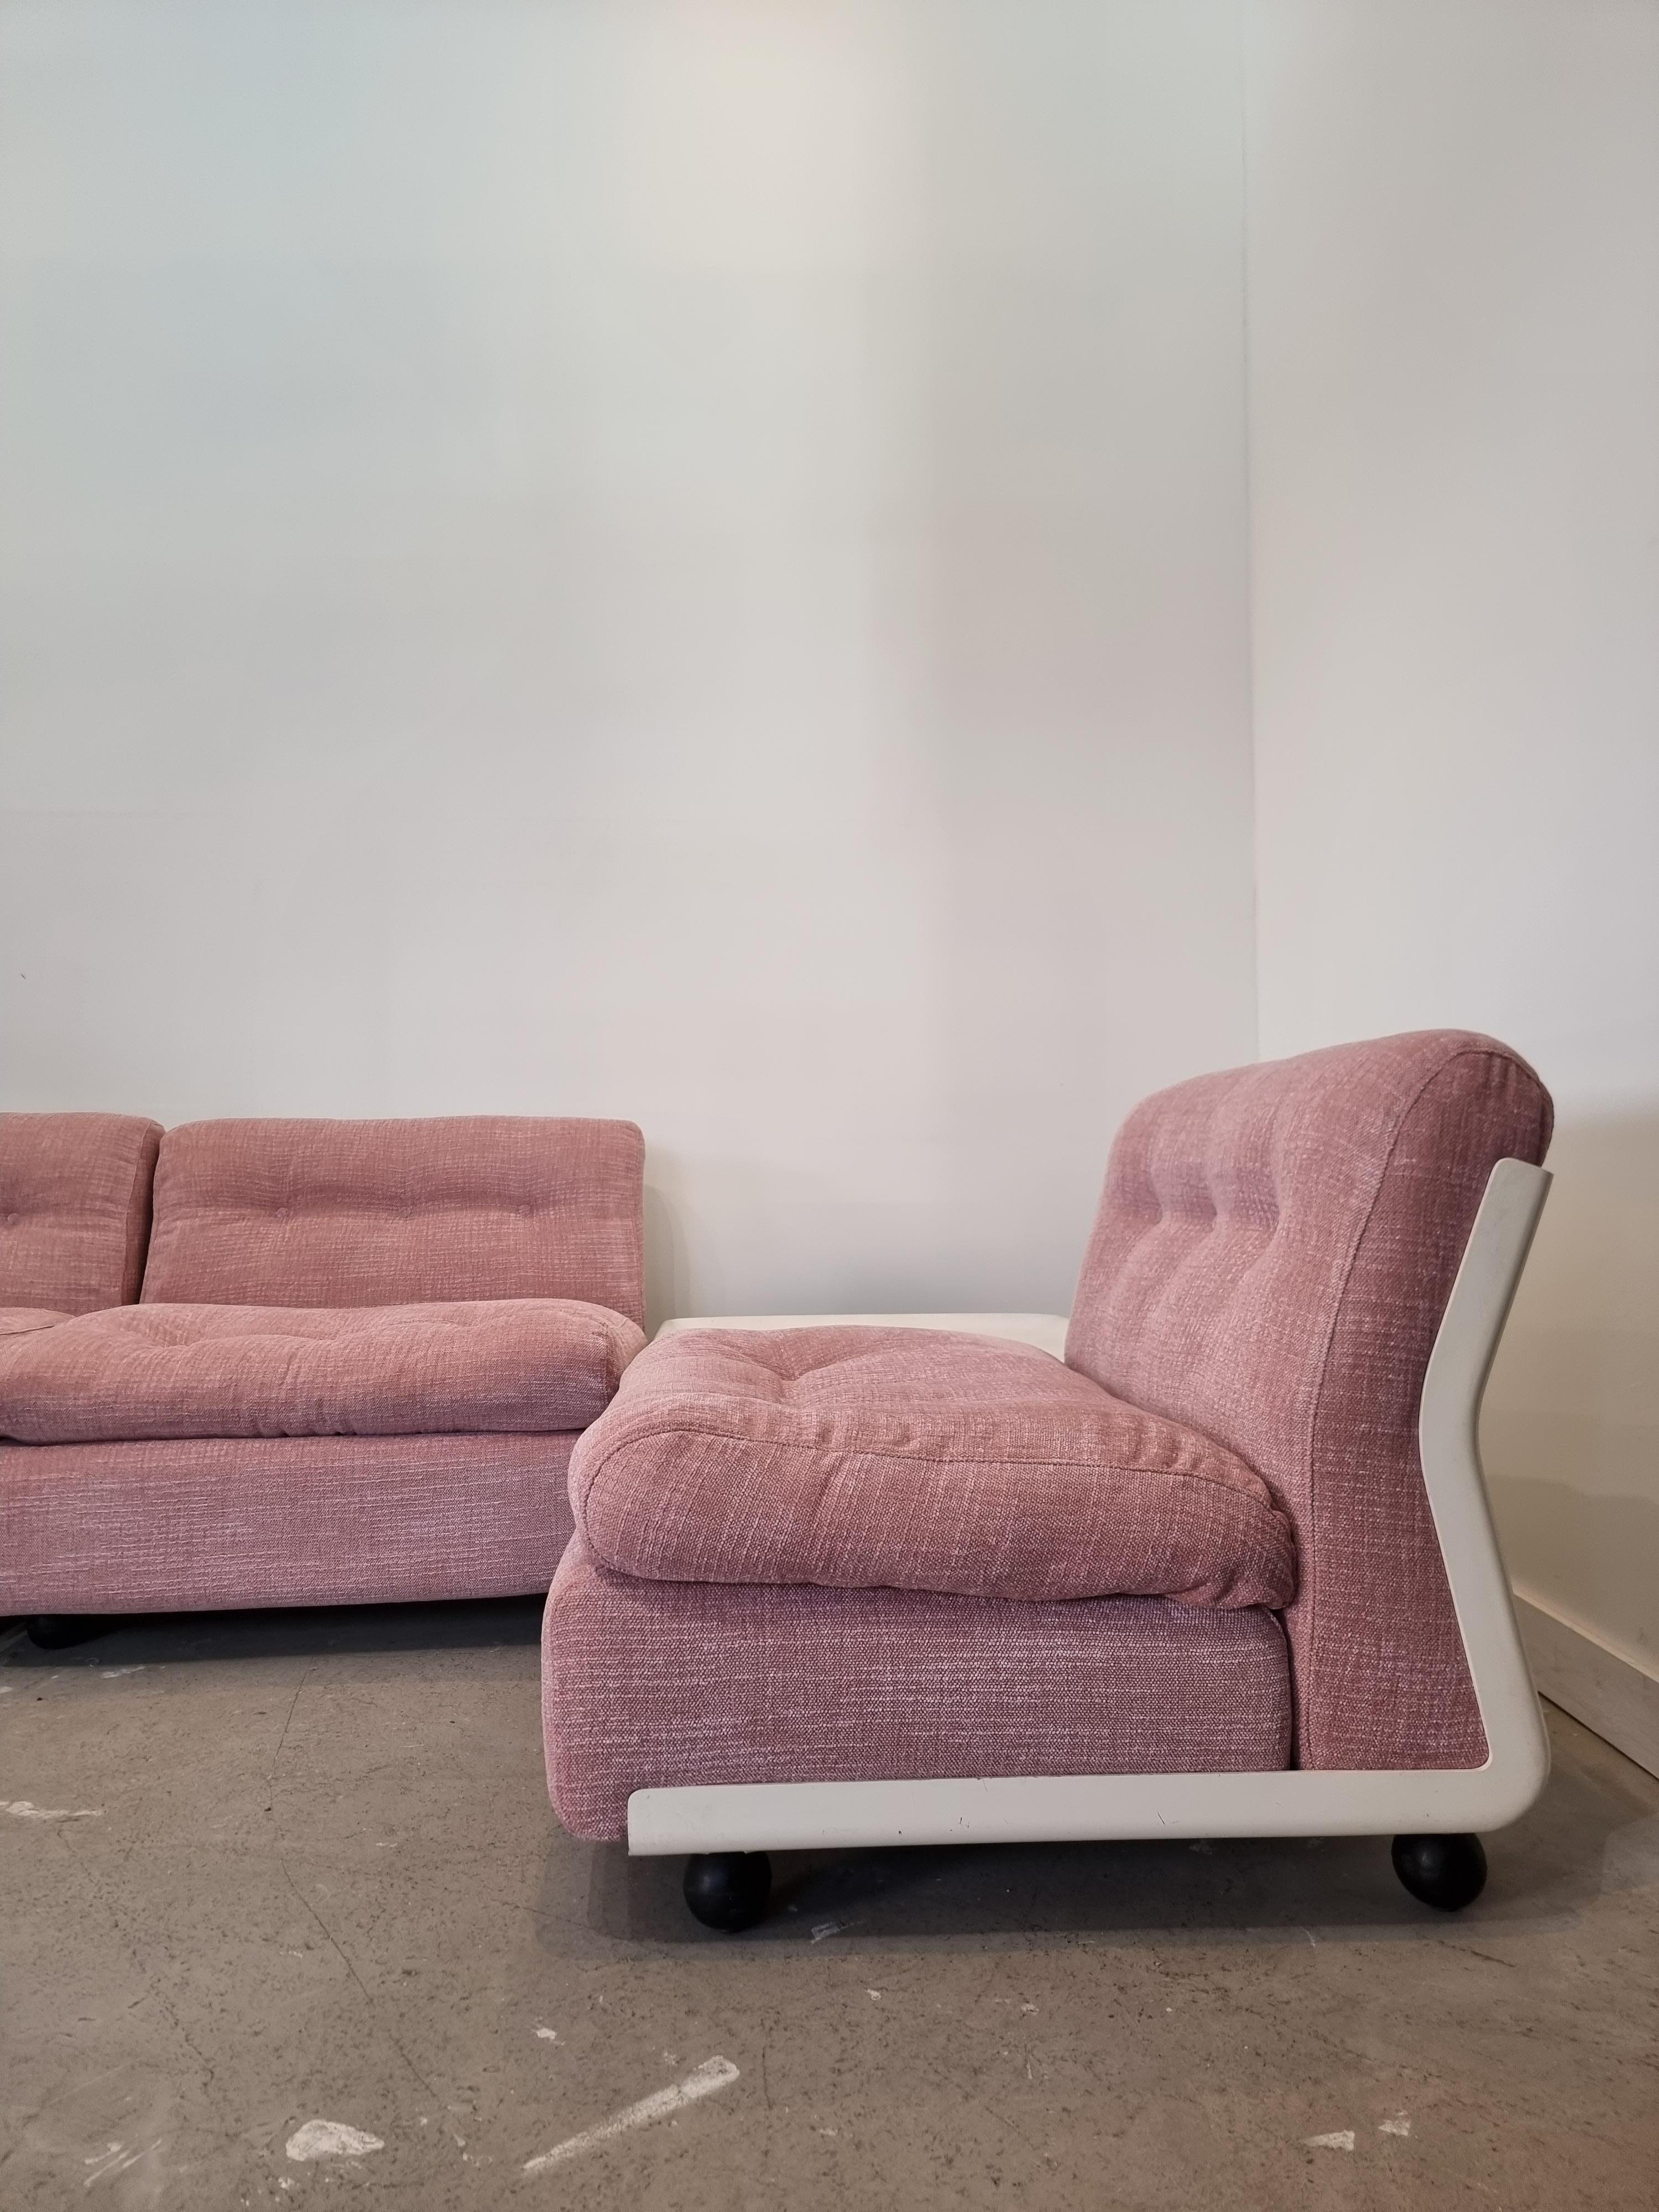 1970s C&B Italia 'Amanta' modular or sectional four chair sofa and coffee table designed by Mario Bellini in 1966. Produced in 1973. C&B Italia are known as B&B Italia today.

The four chairs are made from an enameled Fiberlite structure raised